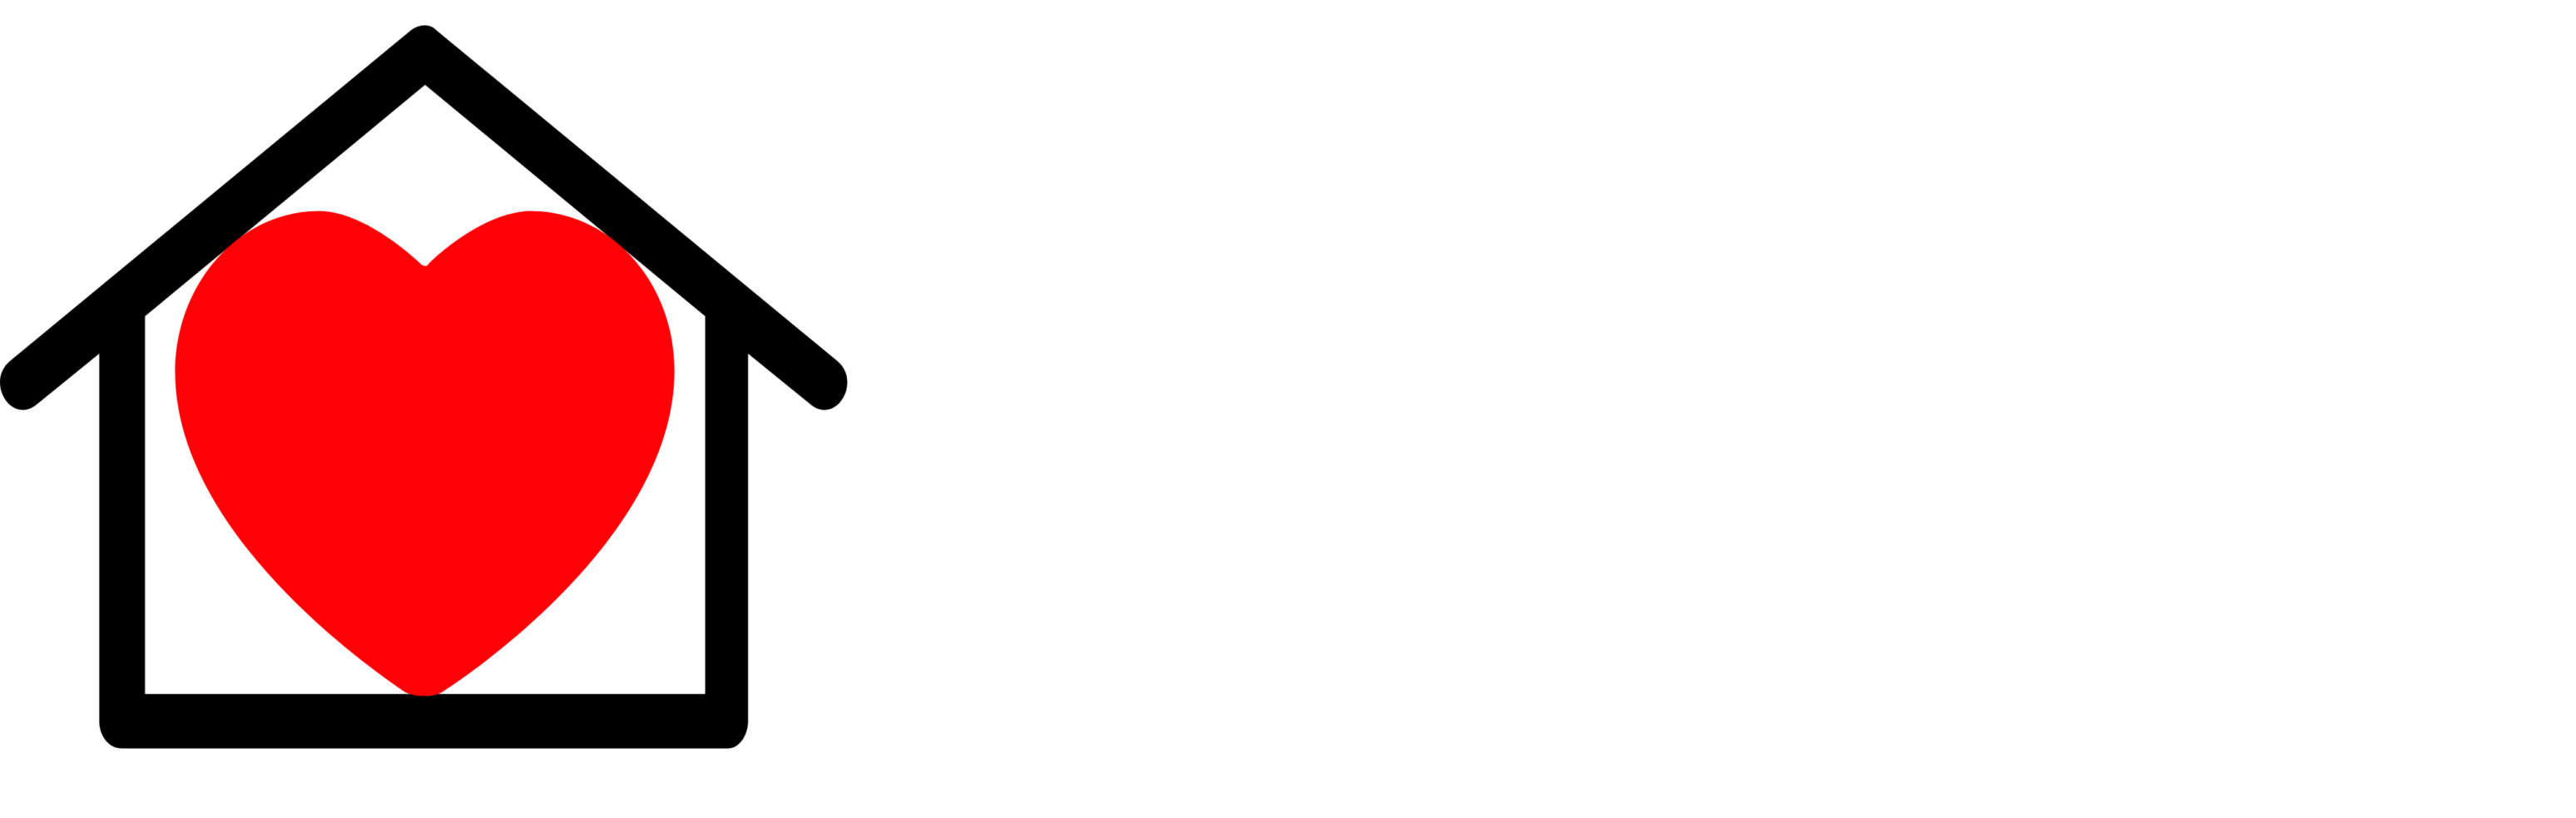 Forever Home Pet Care